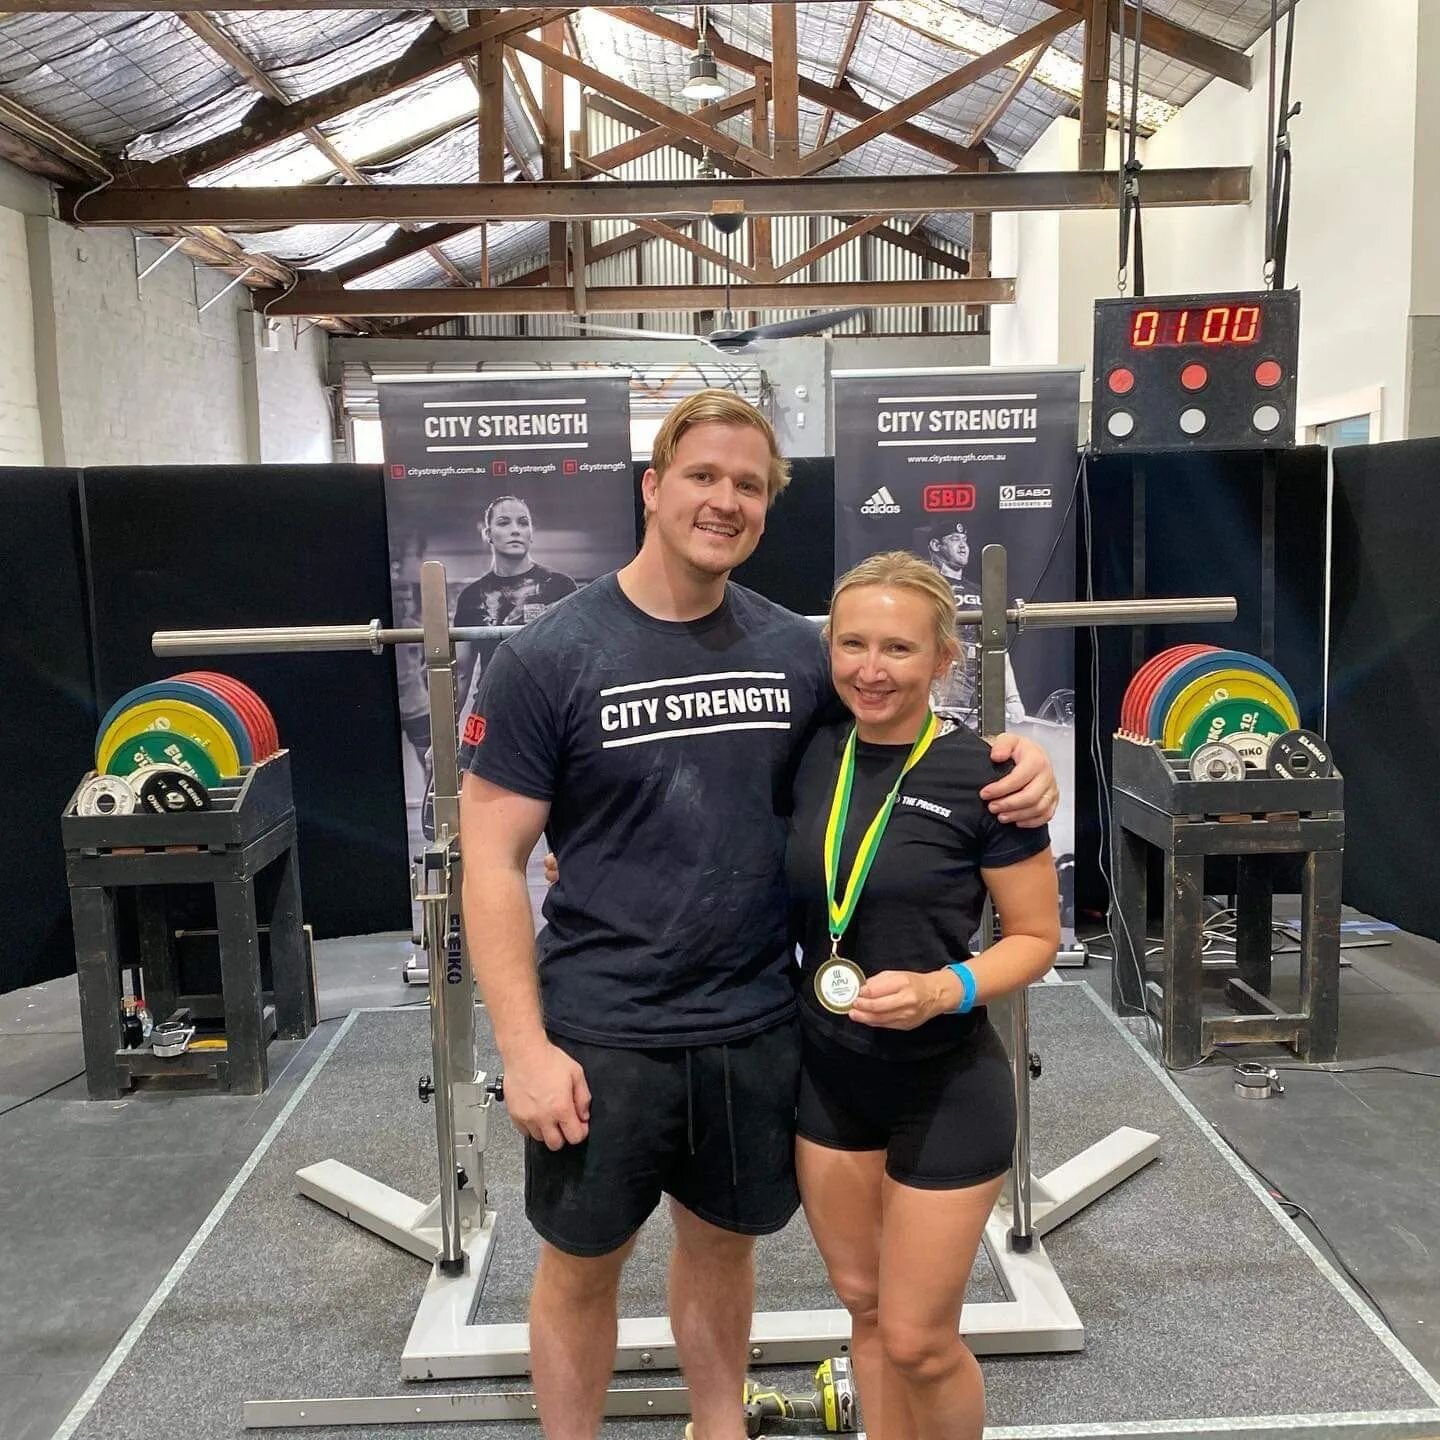 We hosted our first APU competition last weekend on the 6/02/2022: 
@emdash22 and @magsy_  both qualified for states! 

@emdash22 total: 255kg 
@magsy_ total: 292.5kg

Thank you to all the lifters, coaches and volunteers for a great day! See you at s